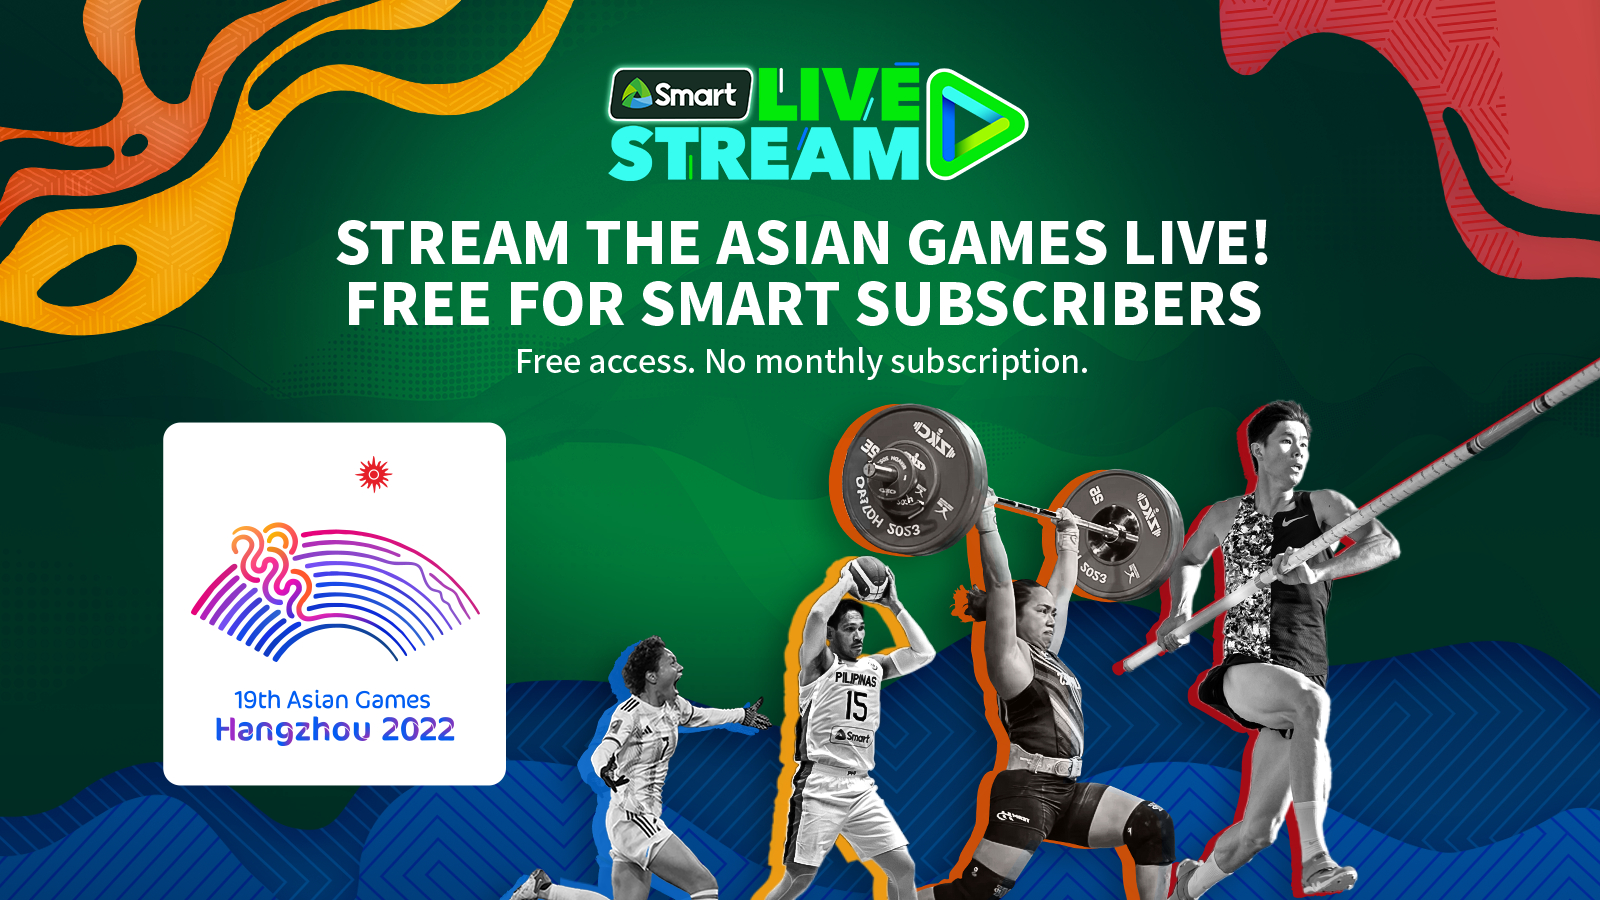 Smart to stream the 19th Asian Games for subscribers